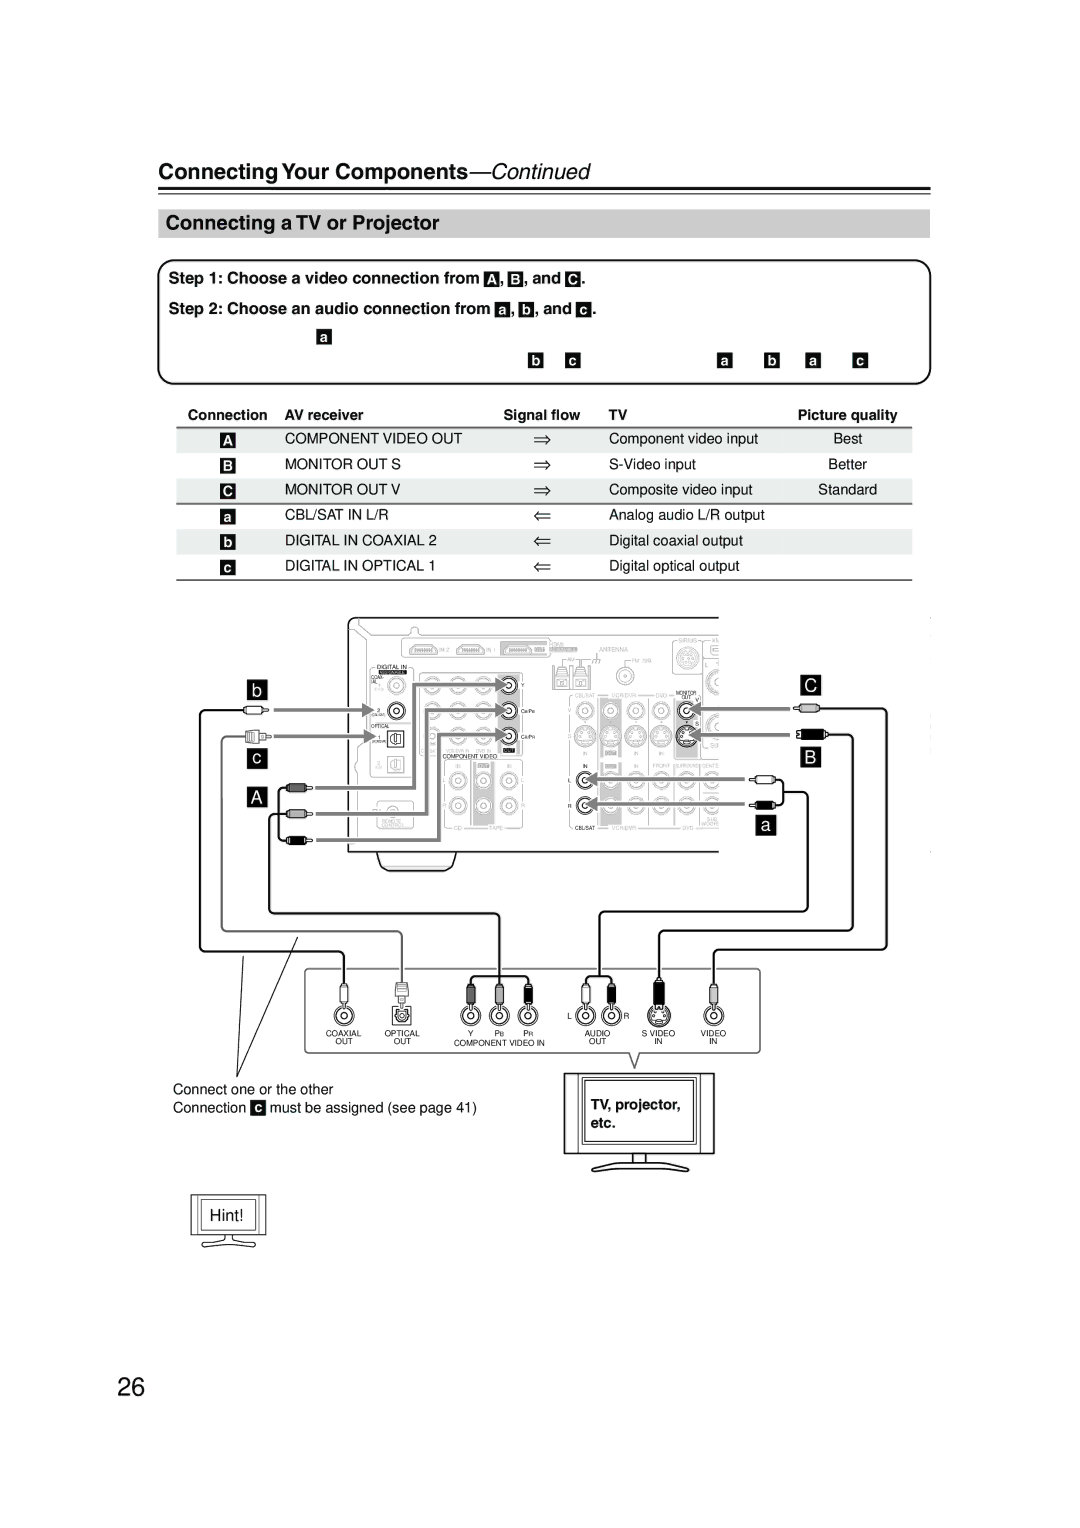 Onkyo SKF-550F, SKB-550, SKM-550S, SKW-550, SKC-550C, HT-R550 instruction manual Connecting a TV or Projector, Hint 